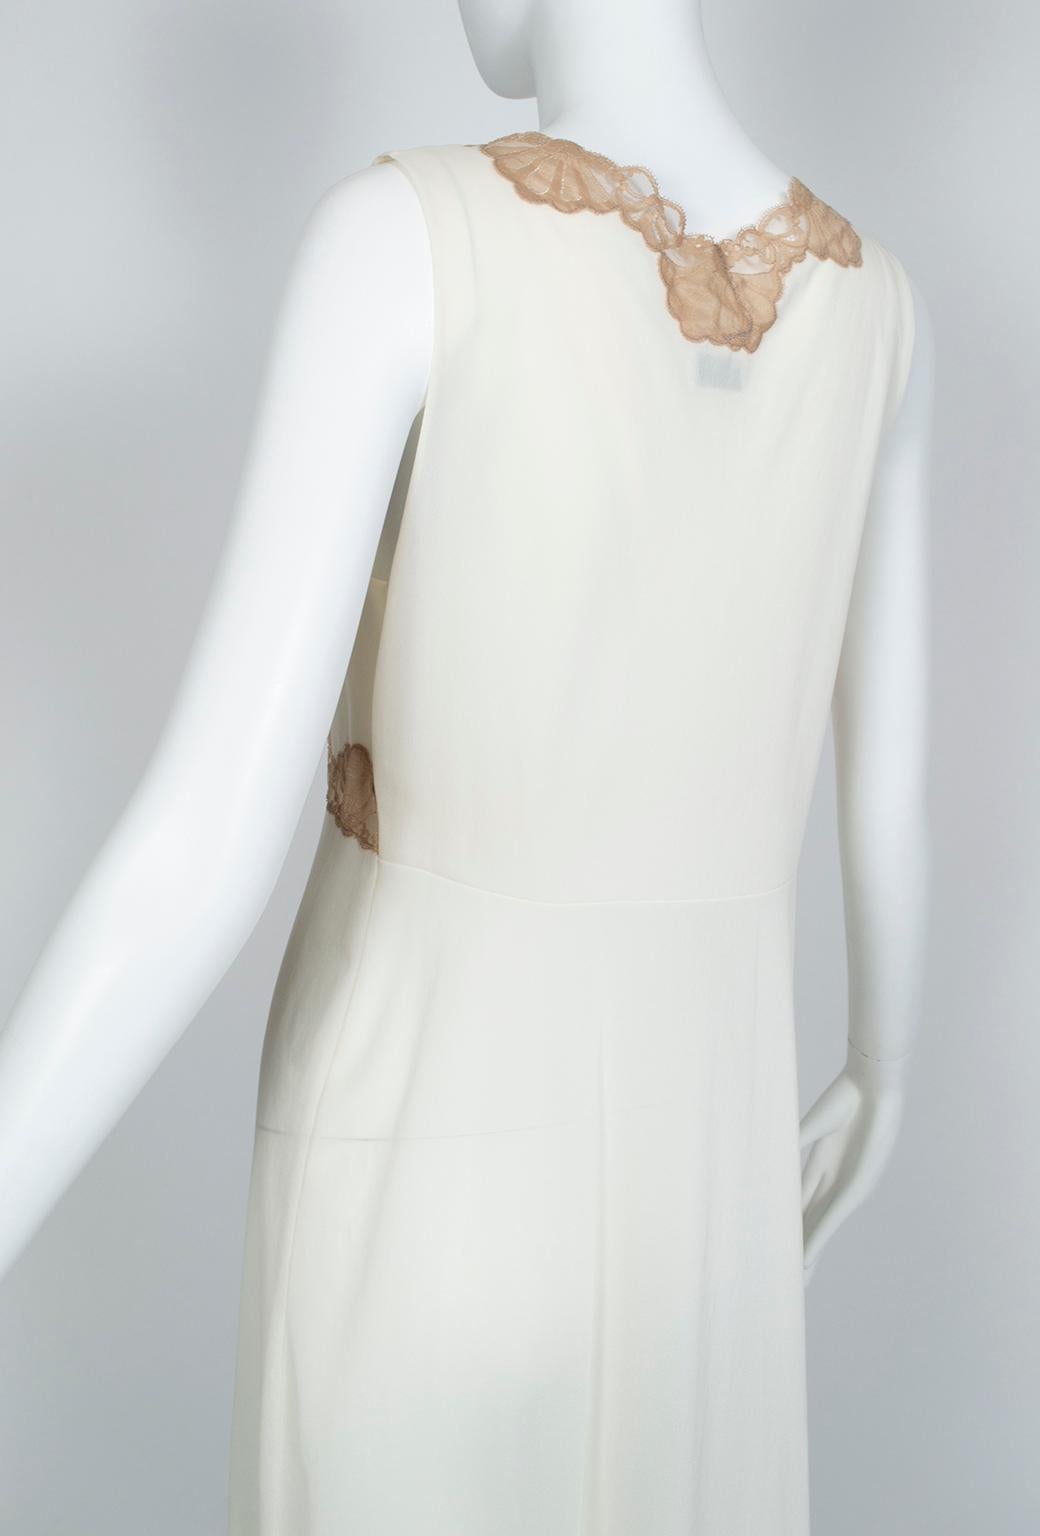 Emilio Pucci Formfit Rogers Ivory Bridal Peignoir Gown and Robe Set – M, 1960s 2